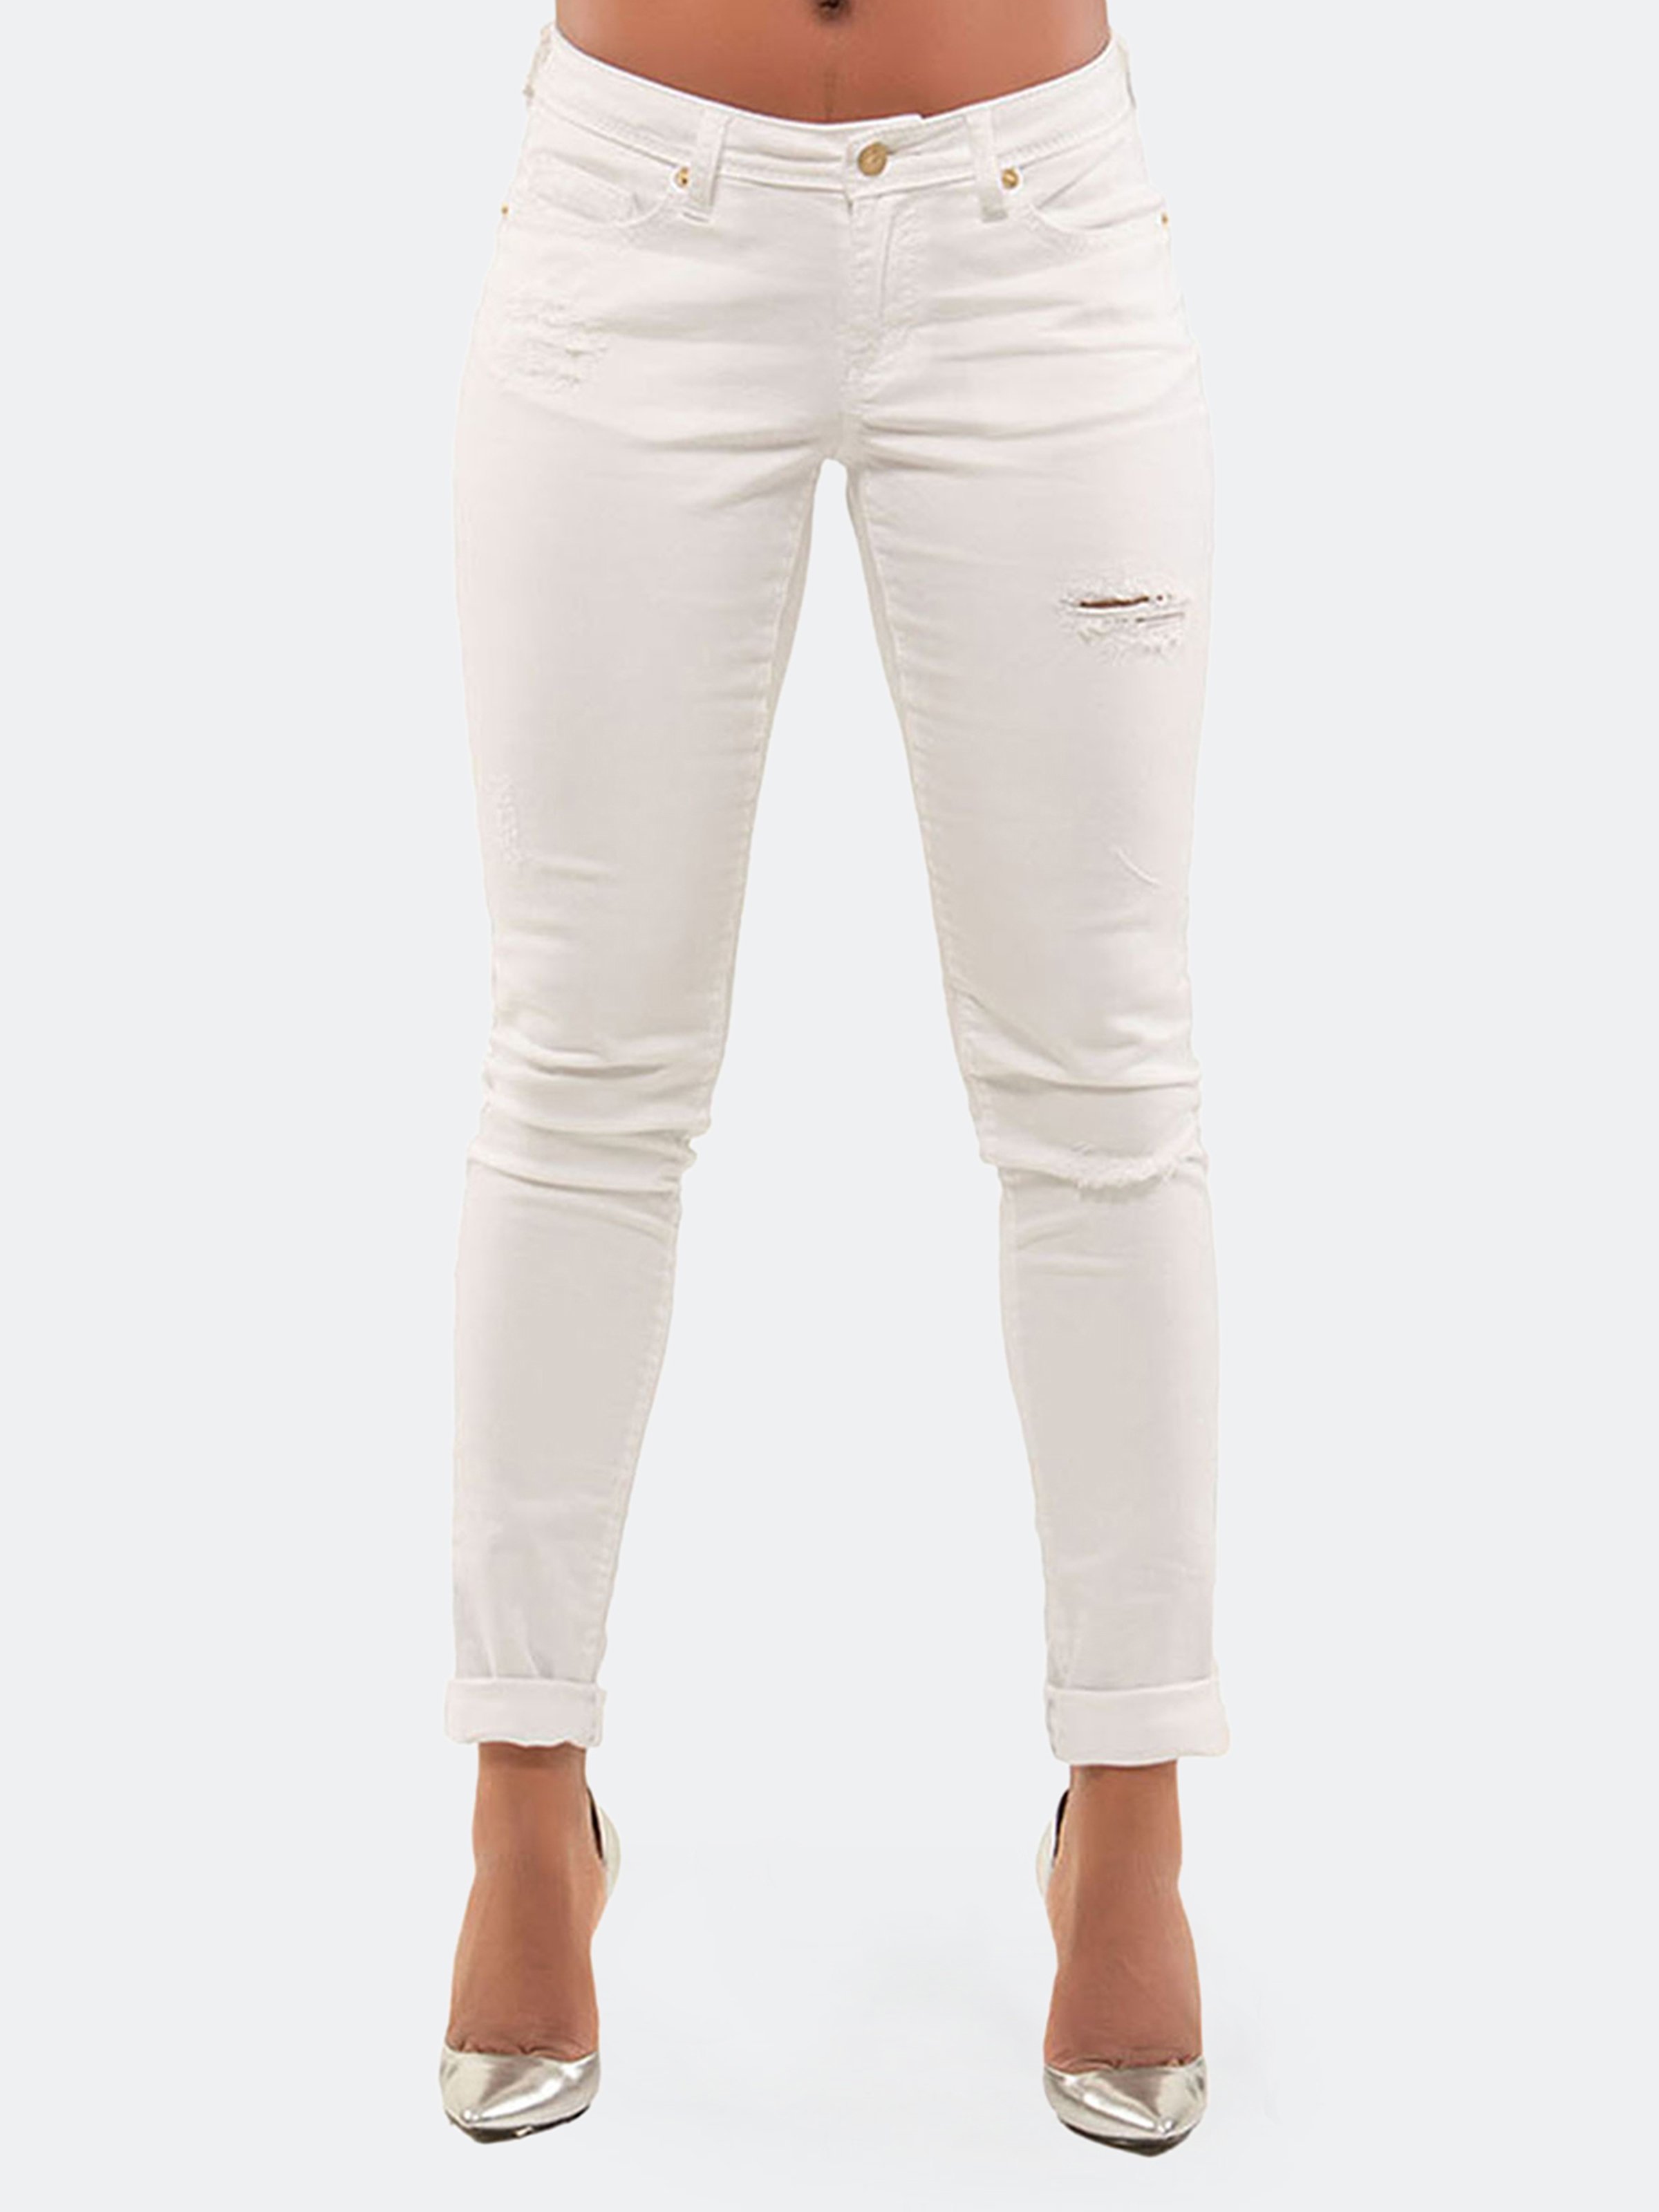 white washed skinny jeans